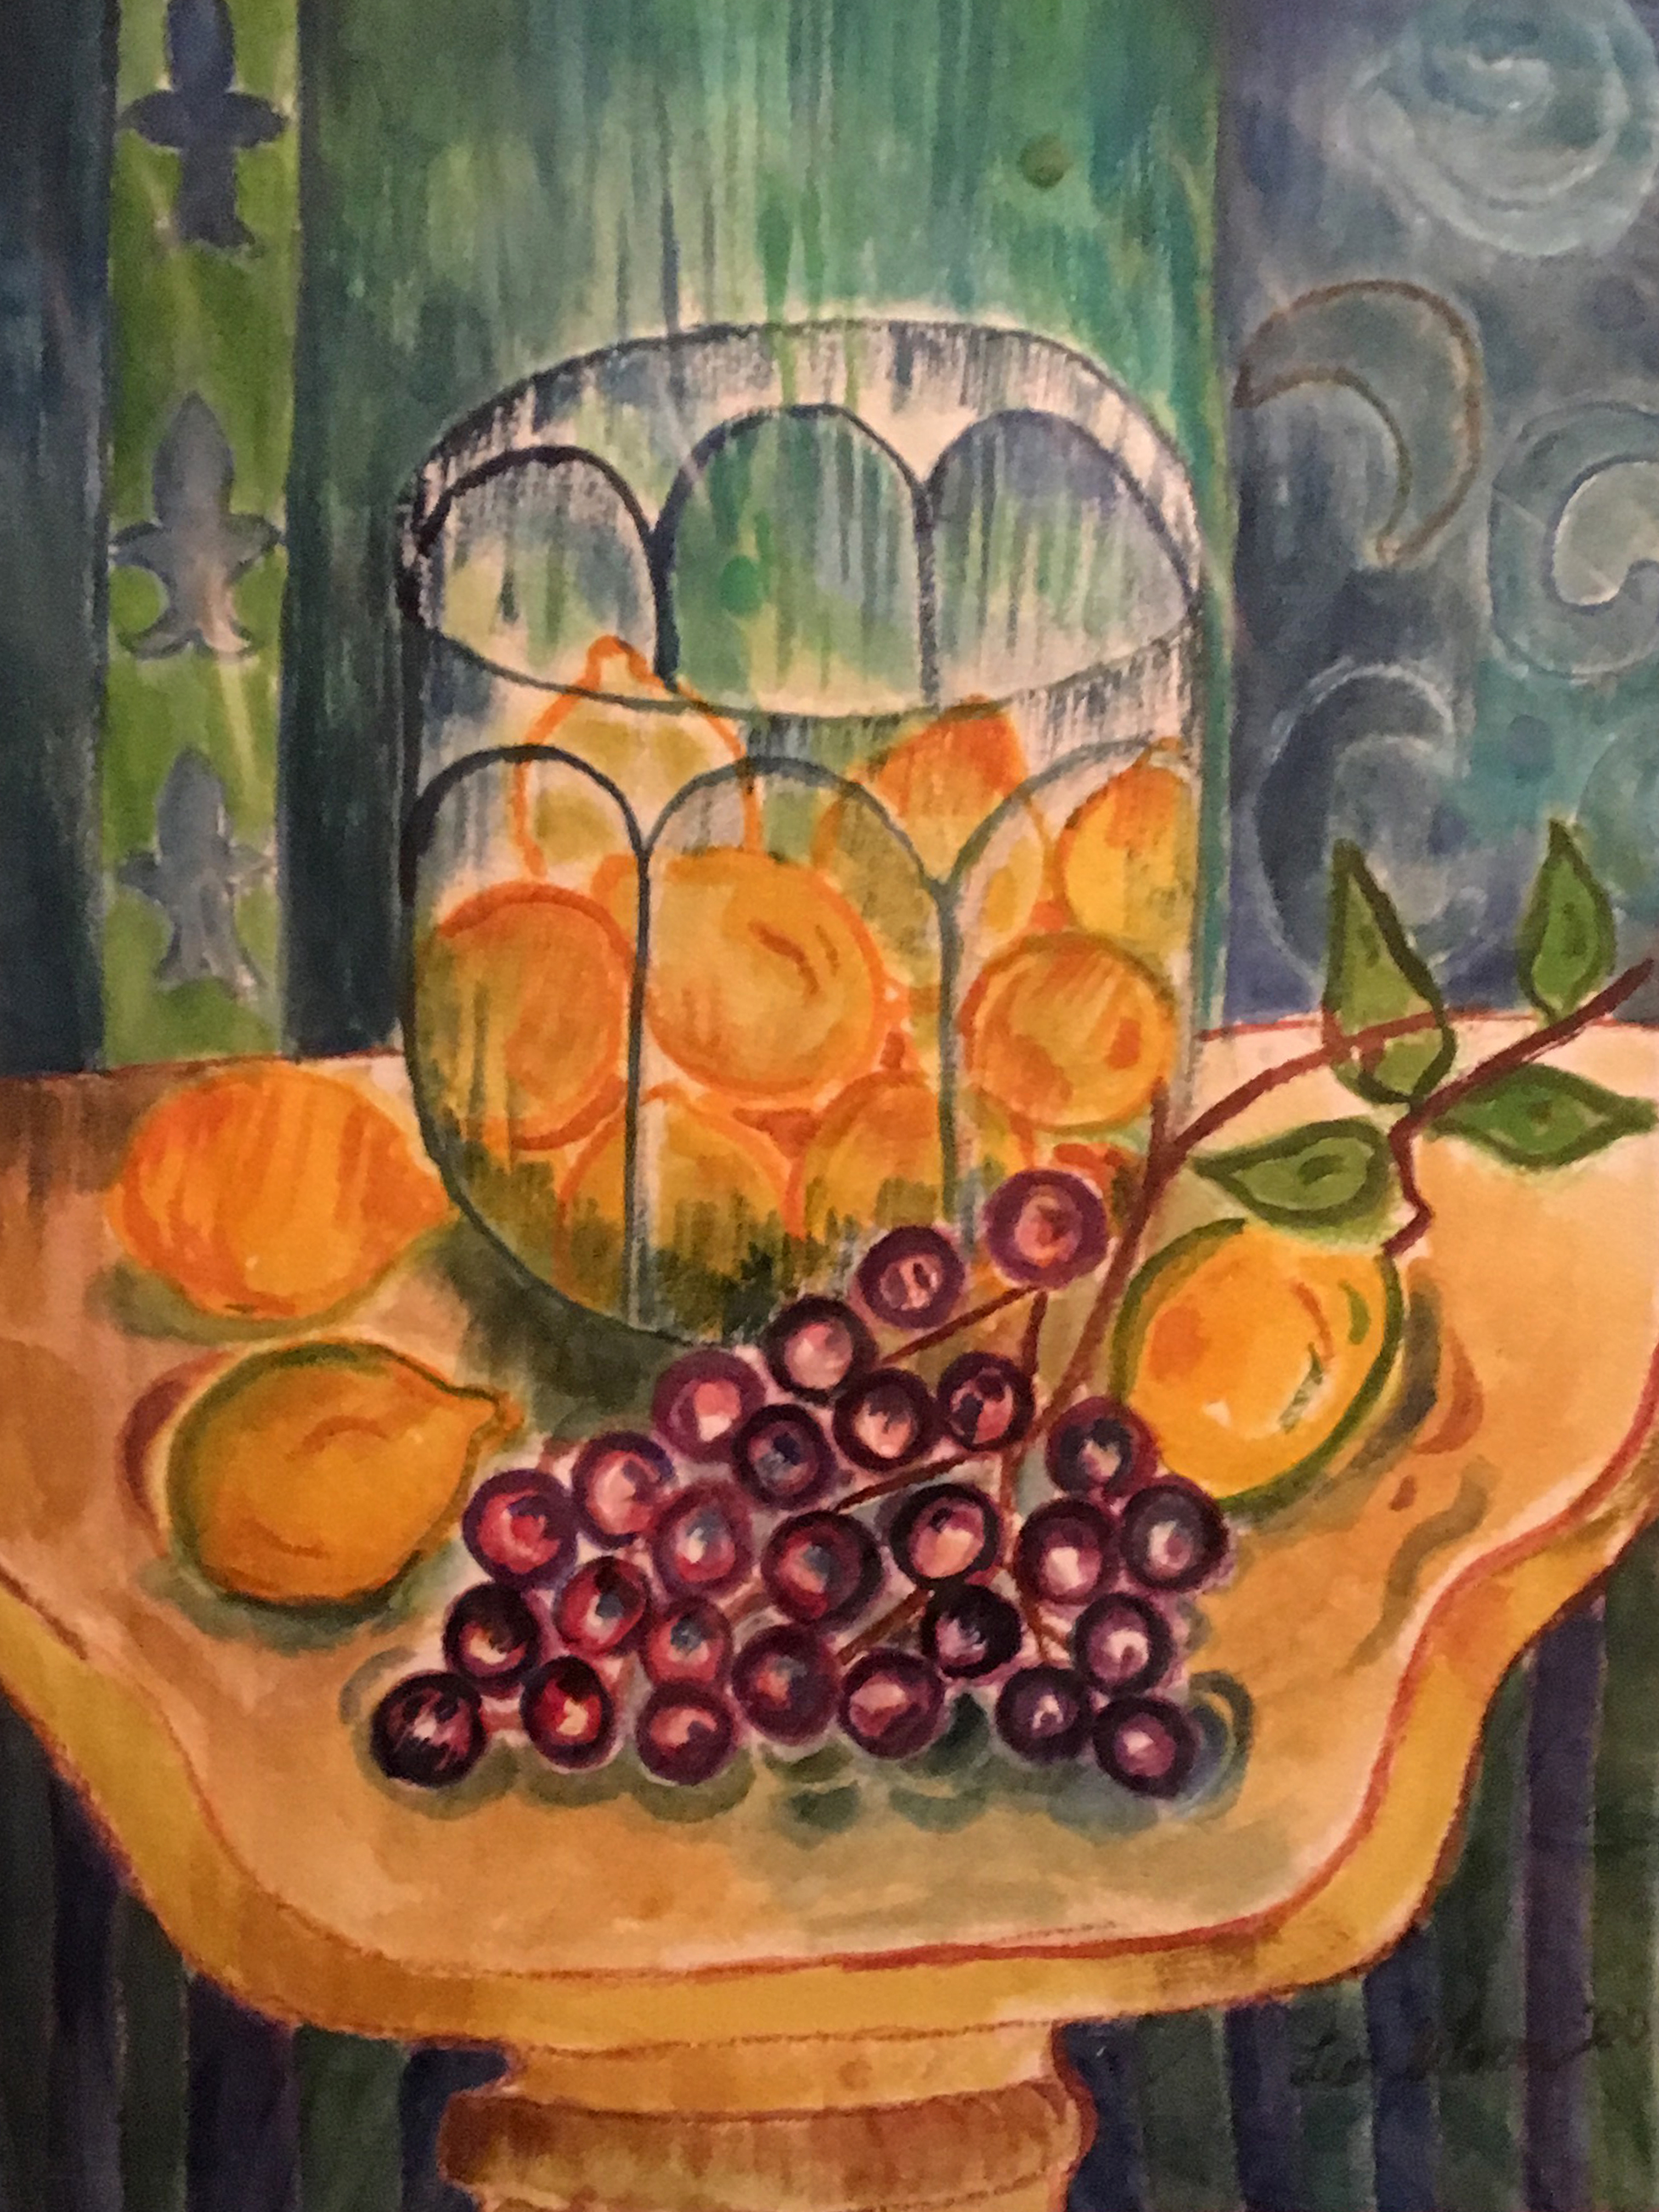 Lemons with grapes